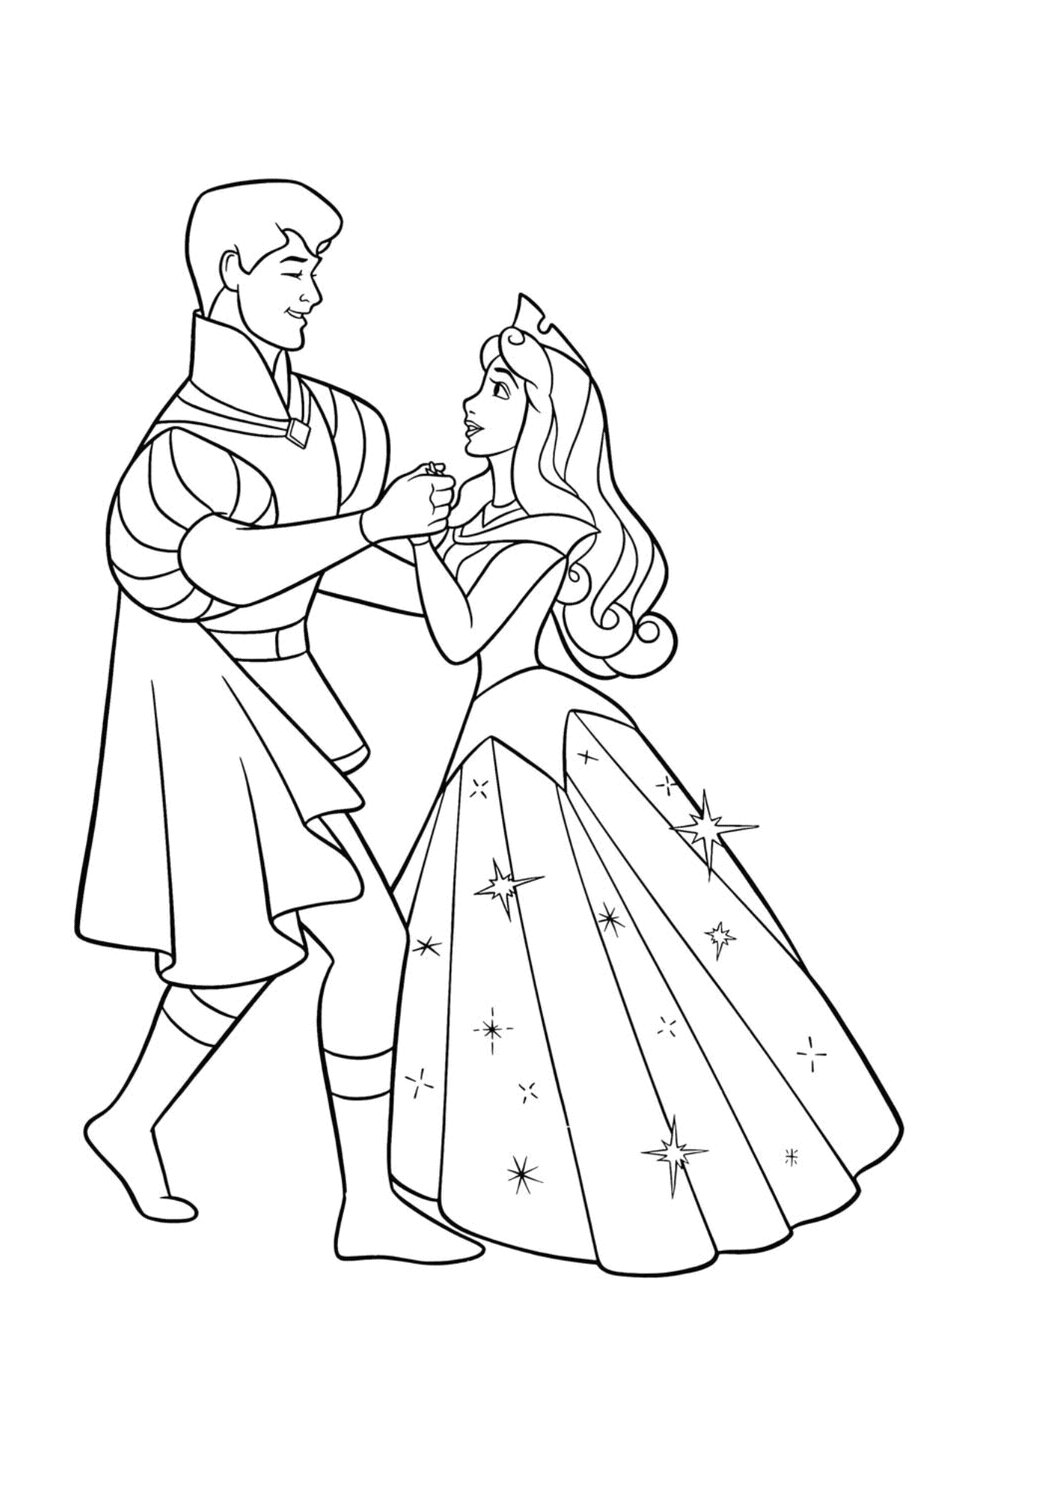 The Princess and the Prince coloring book to print and online